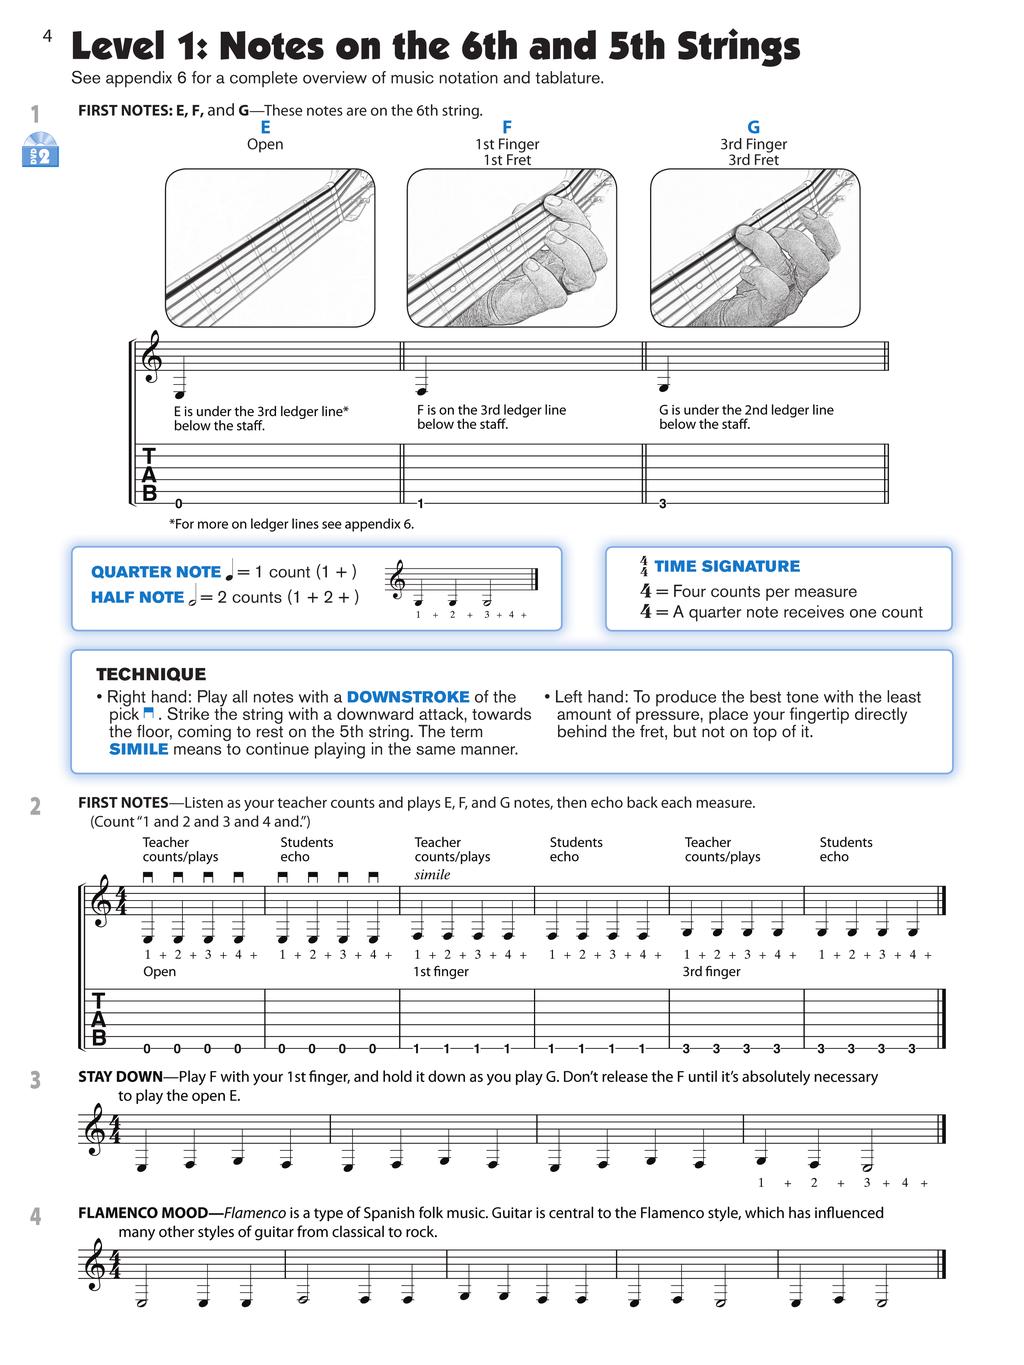 si for guitar book 1 Student Book Features Note Introduction Sequential introduction of notes from low to high Goals Every exercise includes a brief statement identifying what the student should